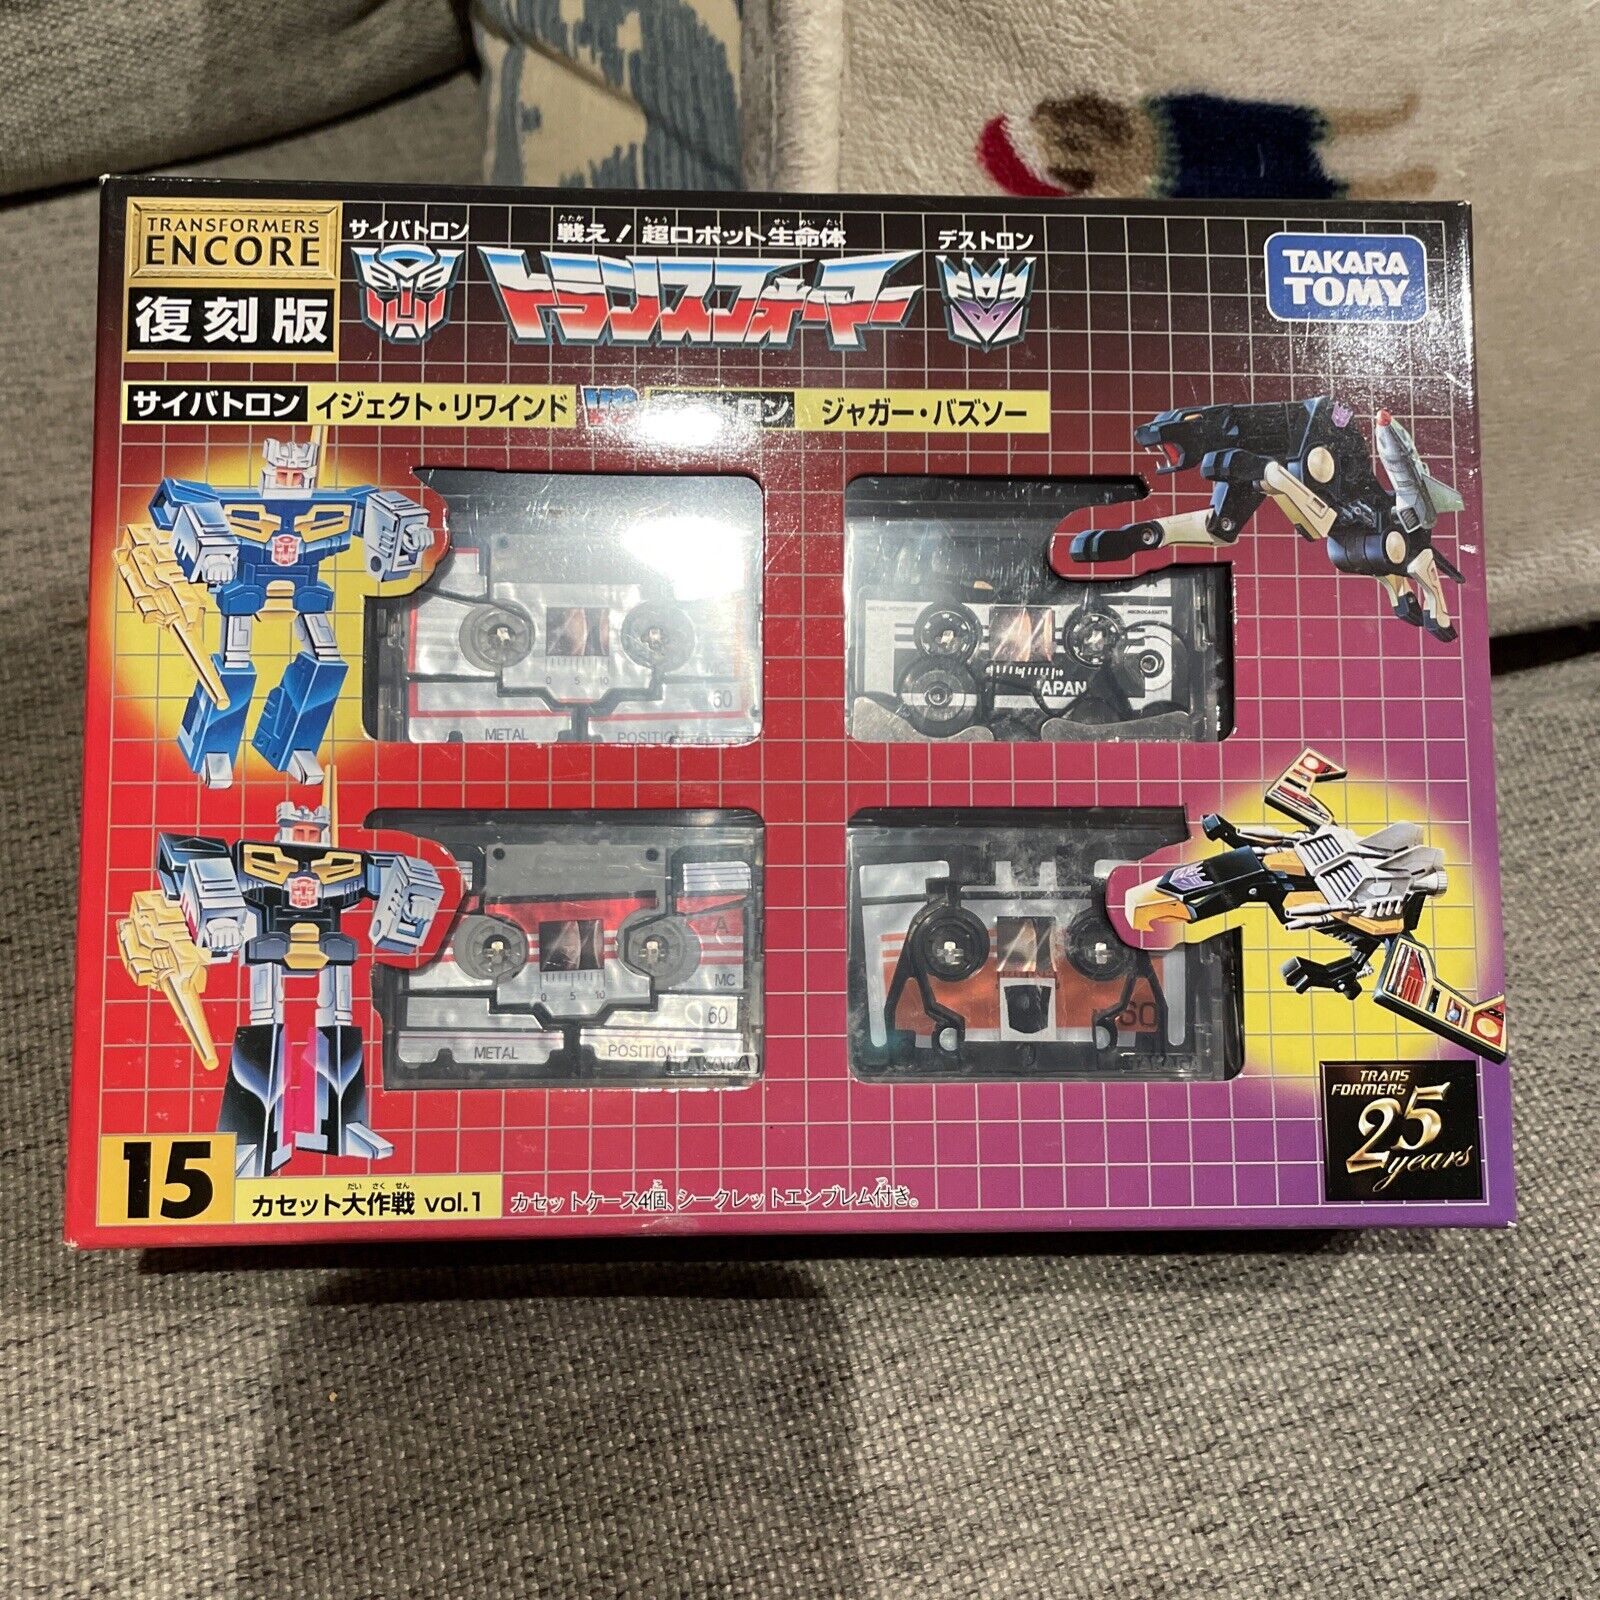 New in Box Takara Tomy Transformers Encore 15 Set of 4 Cassette Figures